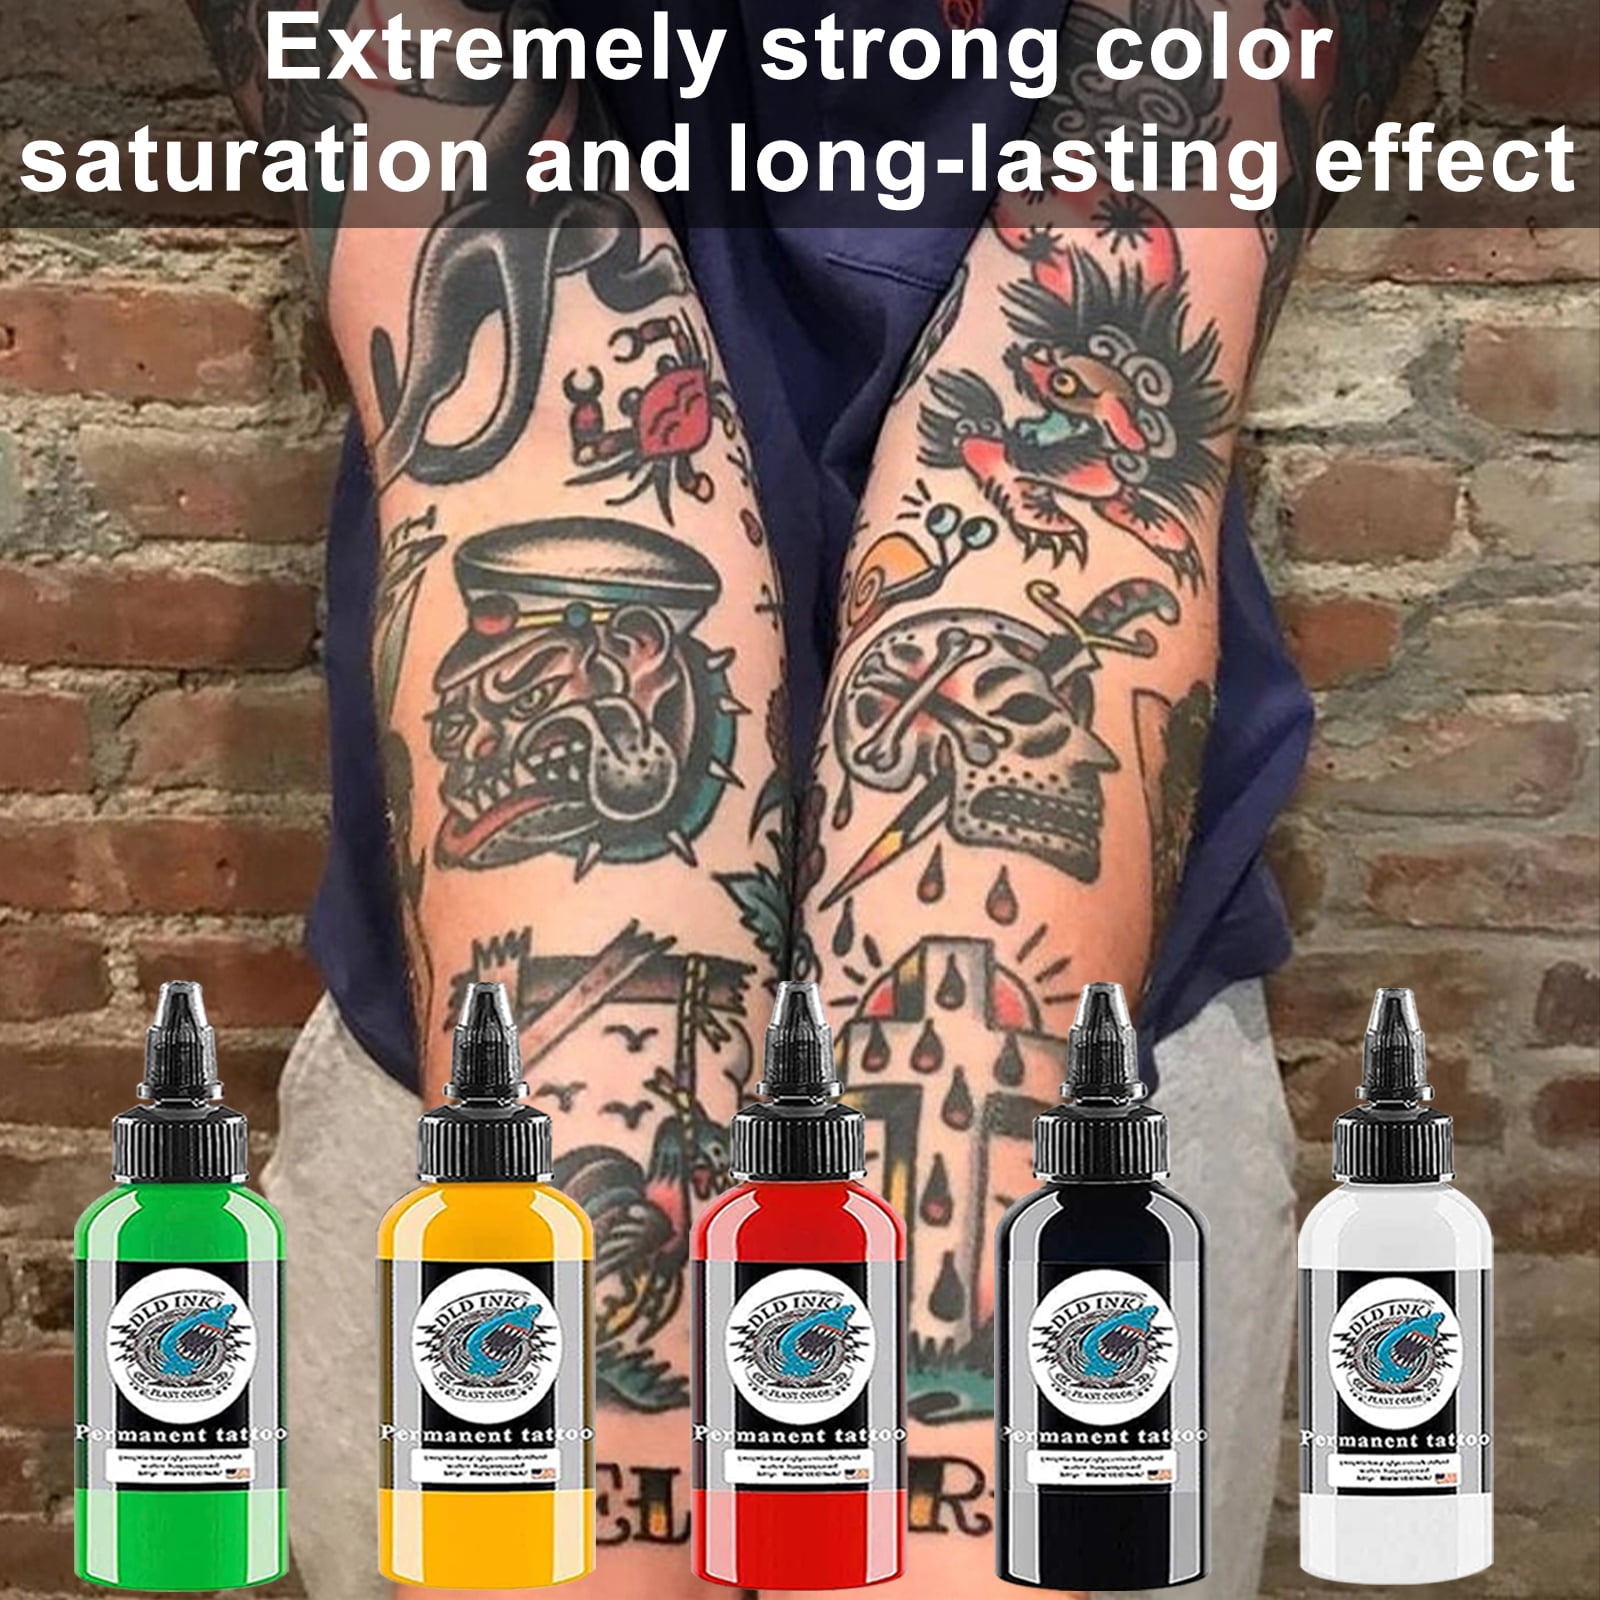 BAODELI 14PCS Tattoo Ink Set - 1oz (30ml) Tattoo Inks Pigment Kit for  Tattooing - Vibrant Colors in This Tattoo Ink Set - Perfect for Tattoo  Artists